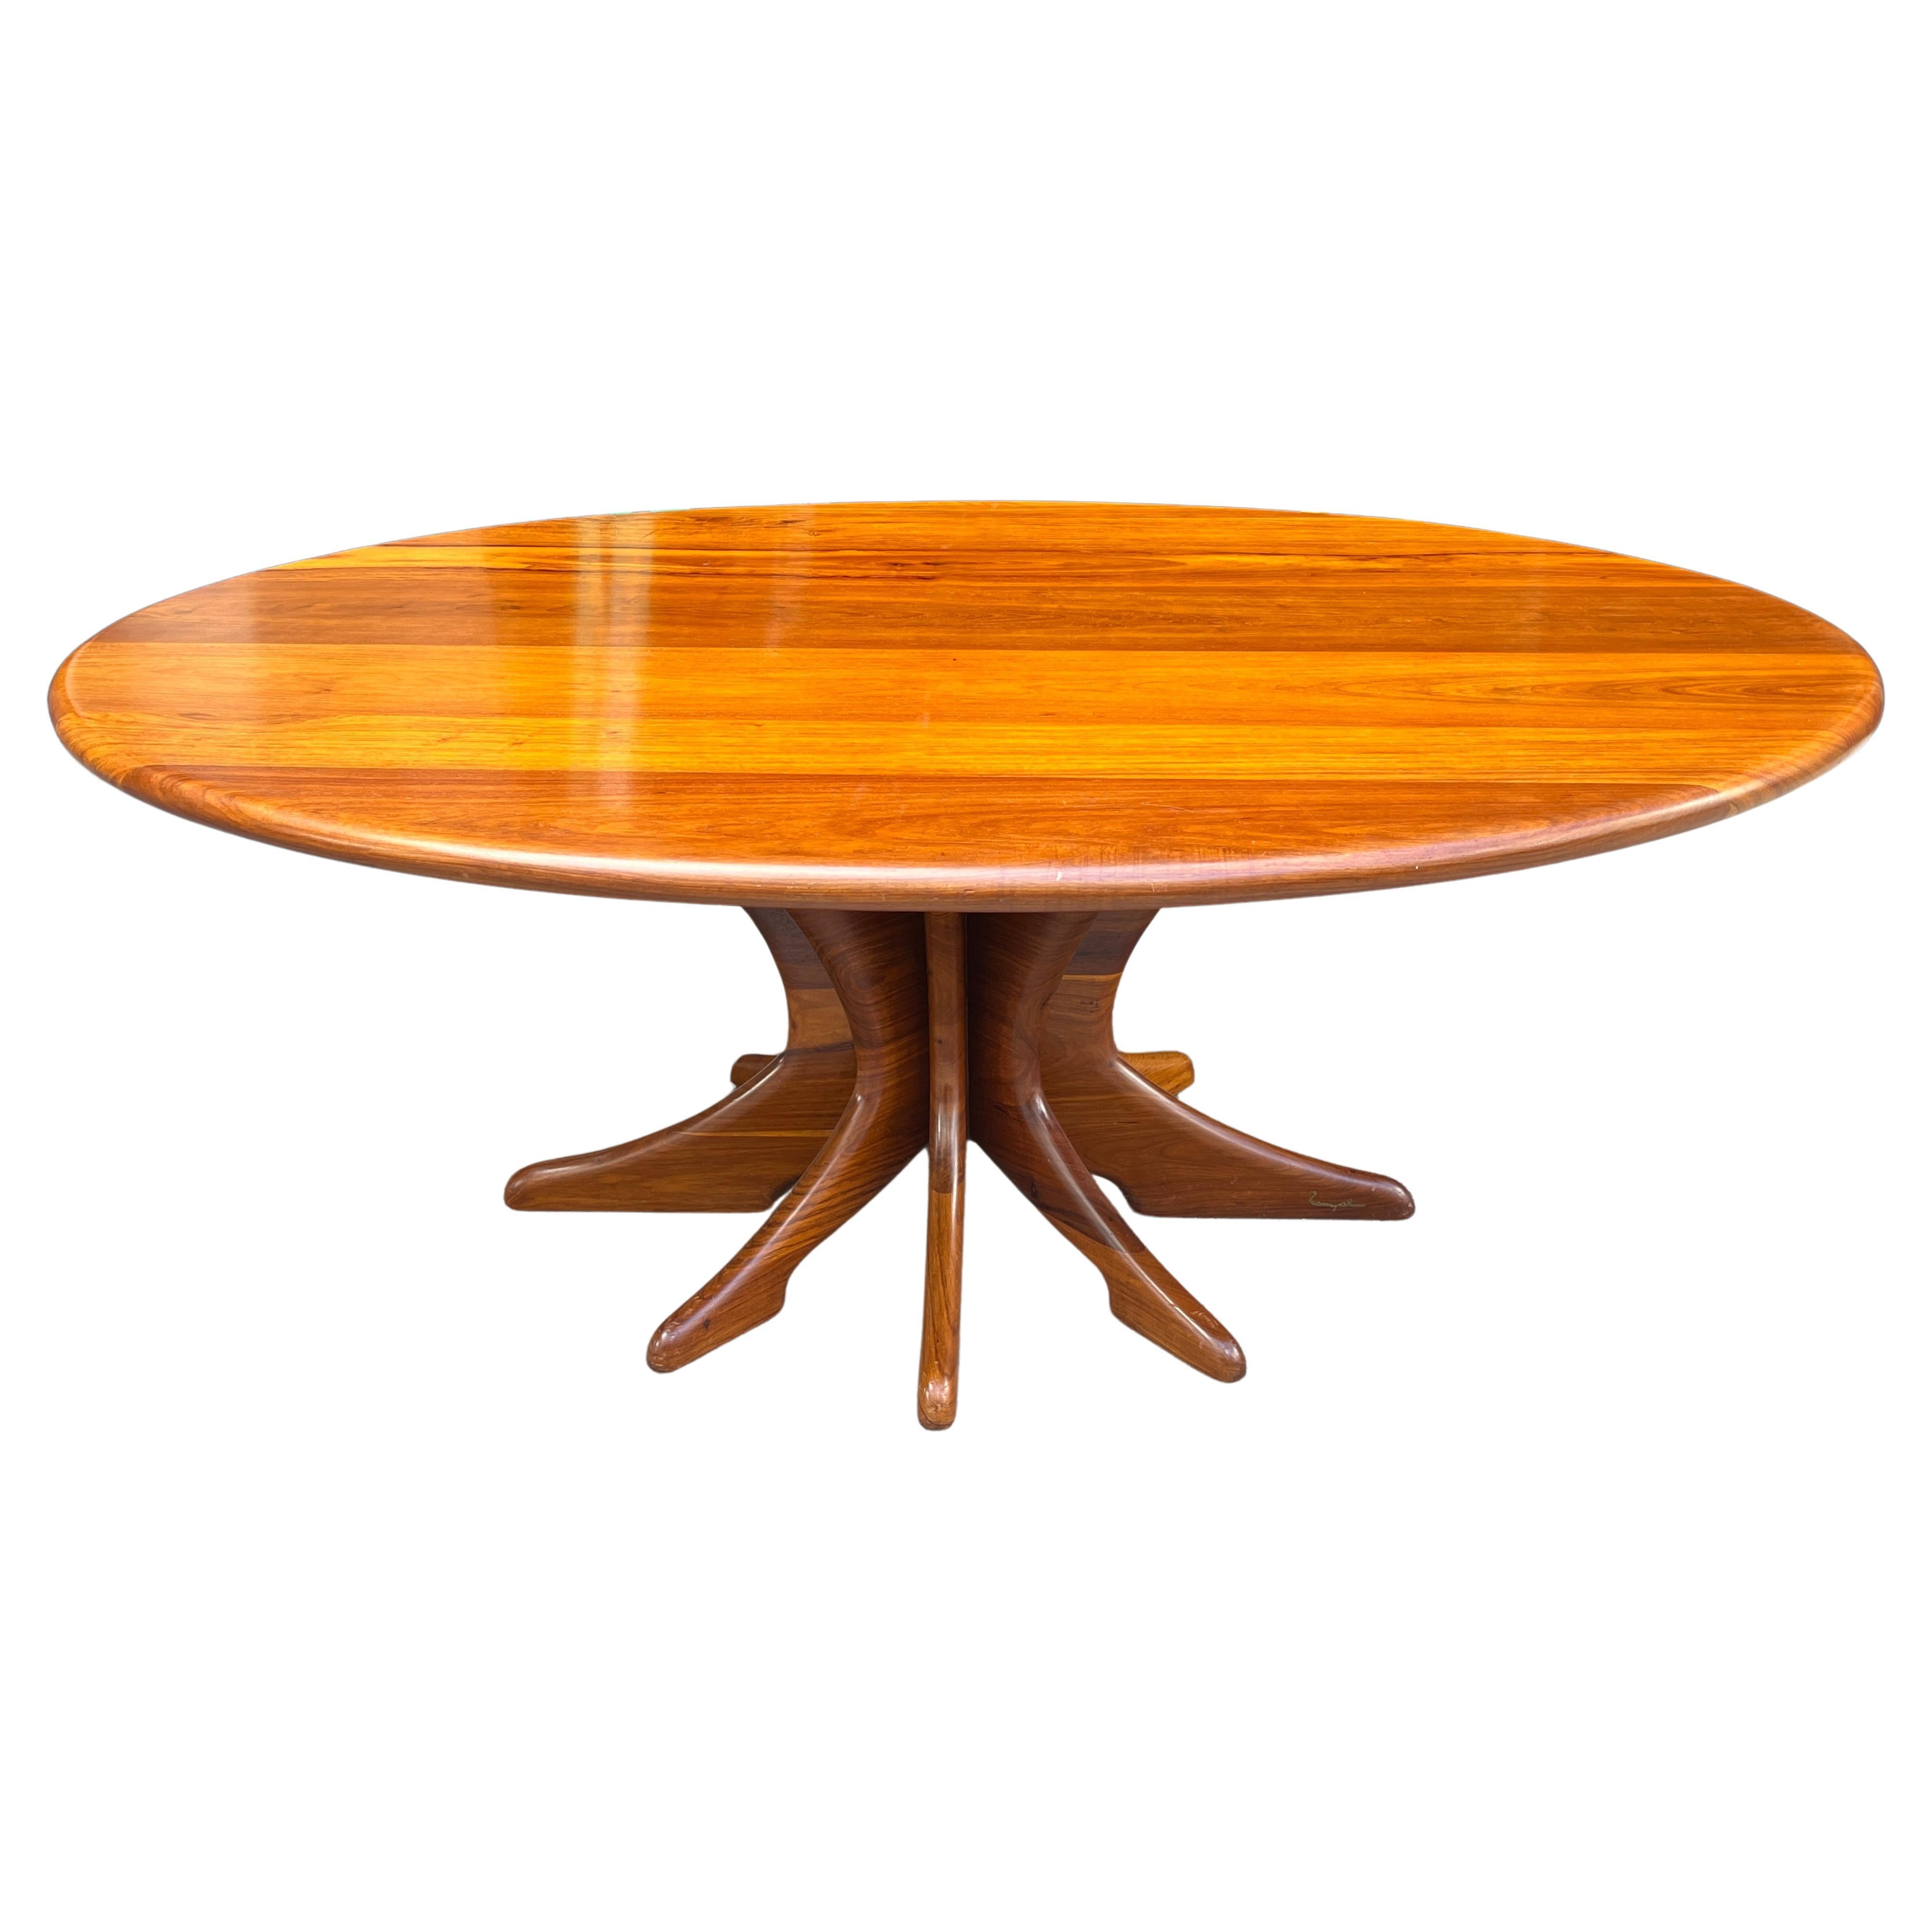 Spectacular and unique dining table with oval top on a 8 arms pedestal base. . Solid wood construction. Unique piece.
seats up to 8 chairs comfortably. Top can easily be removed for easy transport.

ht. 30, lg, 74, wd. 54 in.
